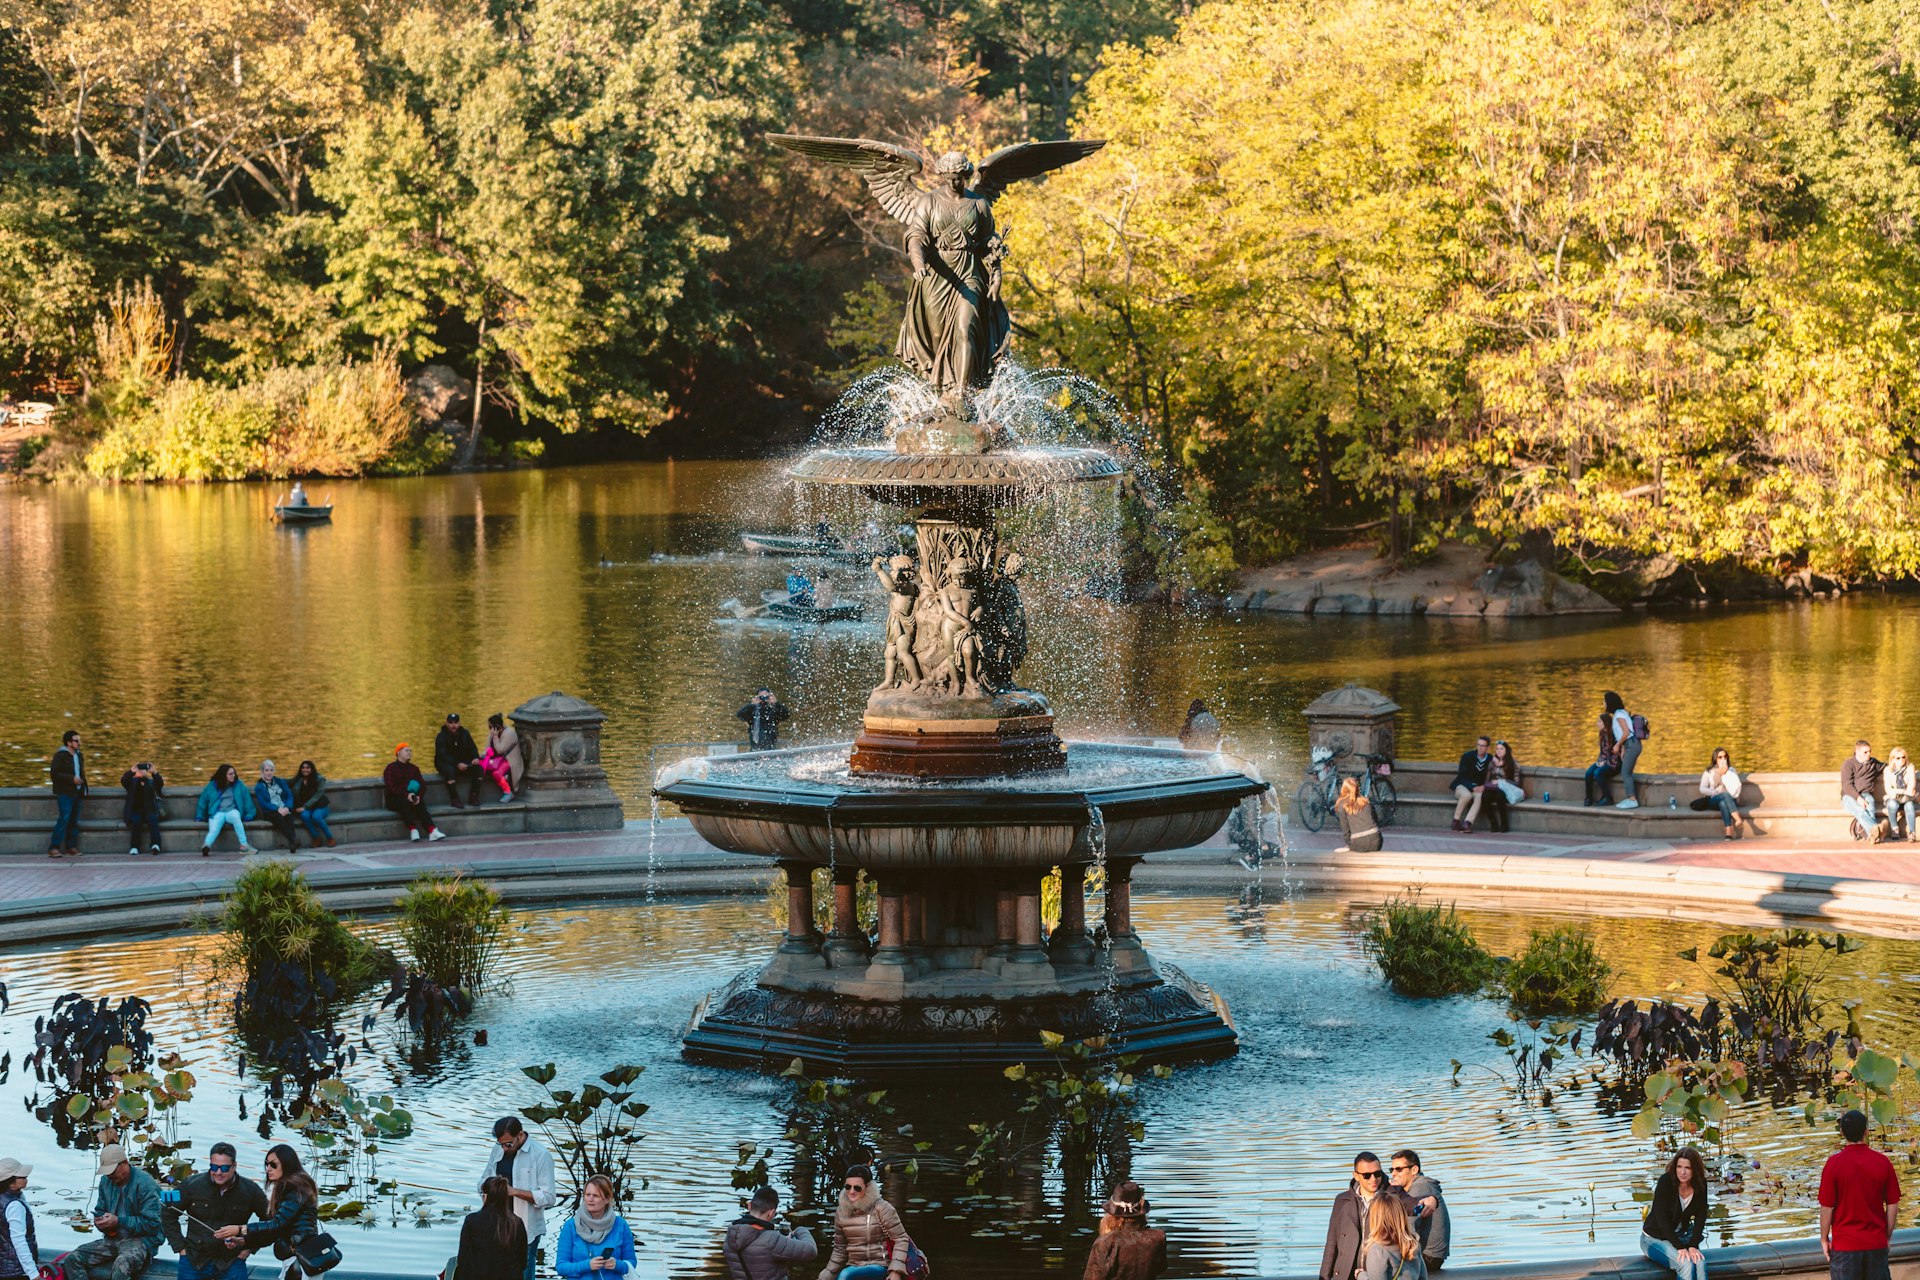 People gather around Bethesda Fountain in Central Park.